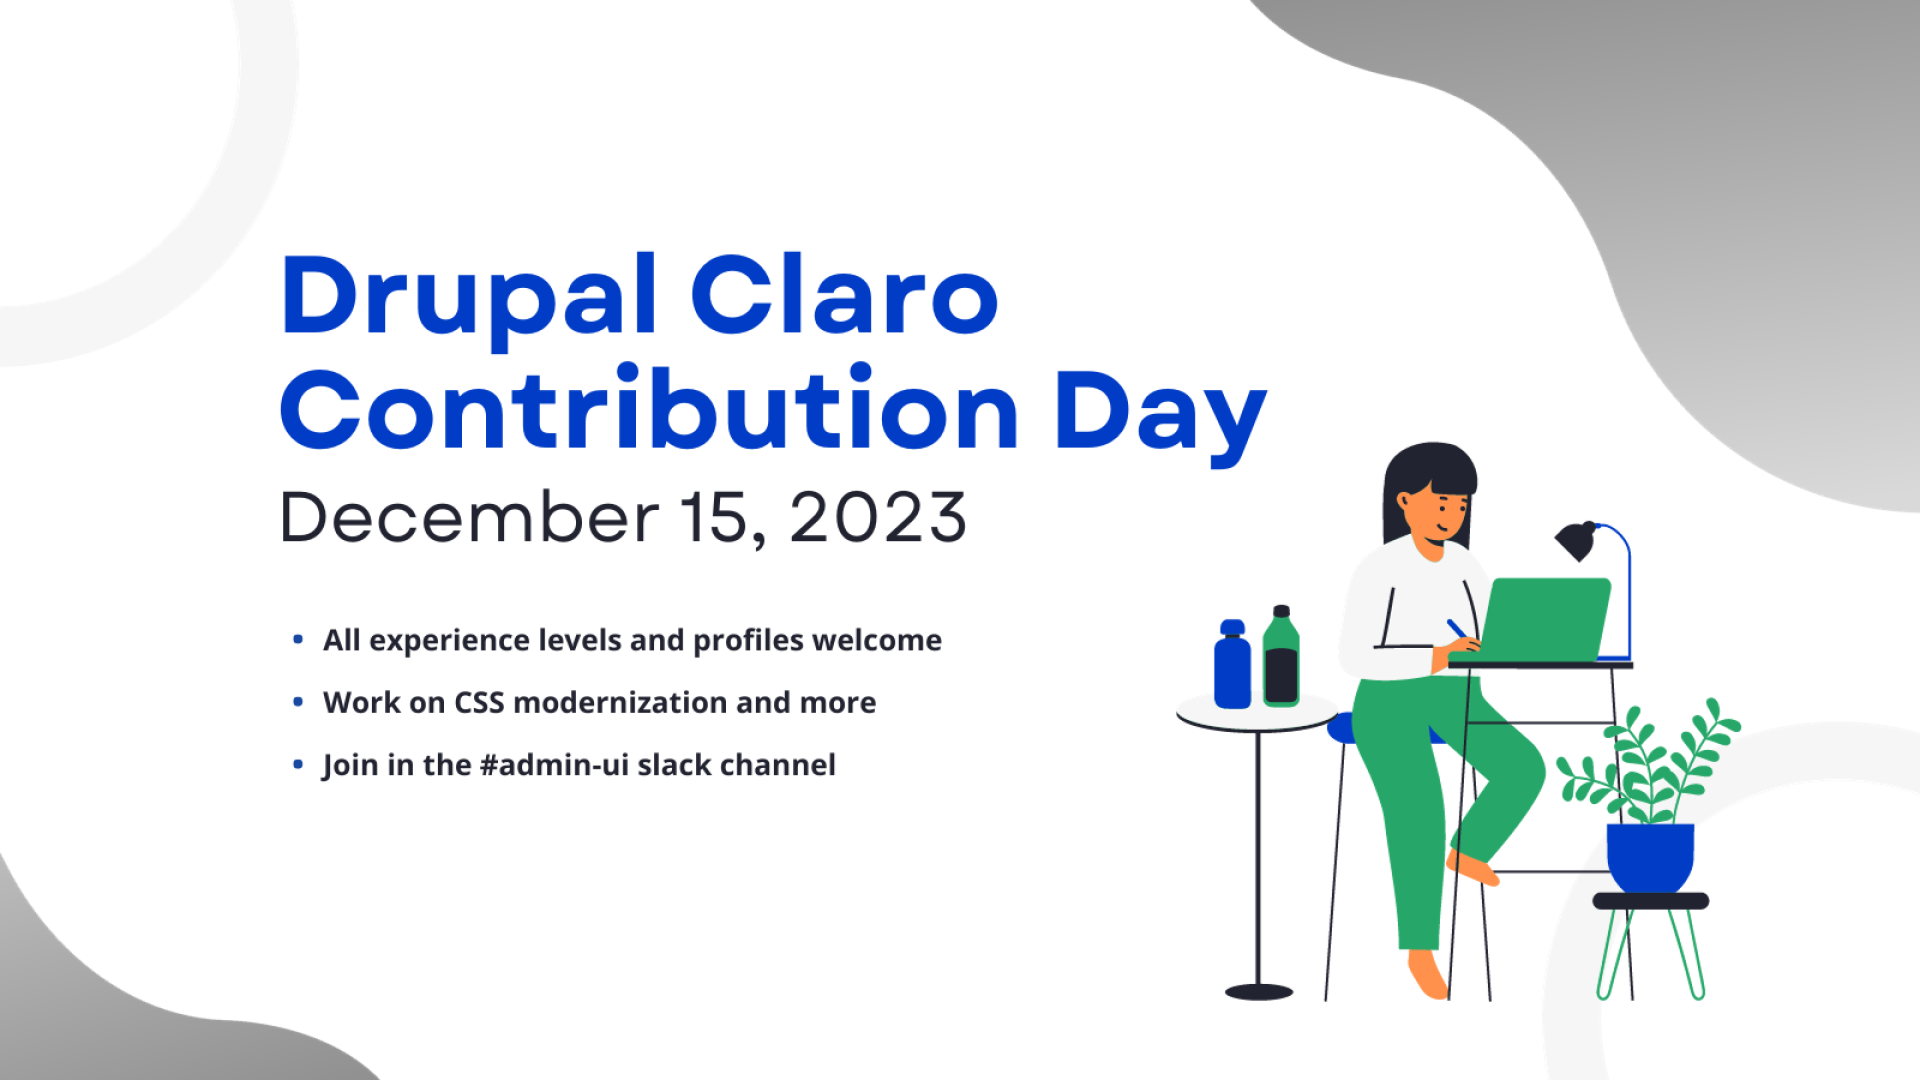 Claro contribution day on December 15th, 2023